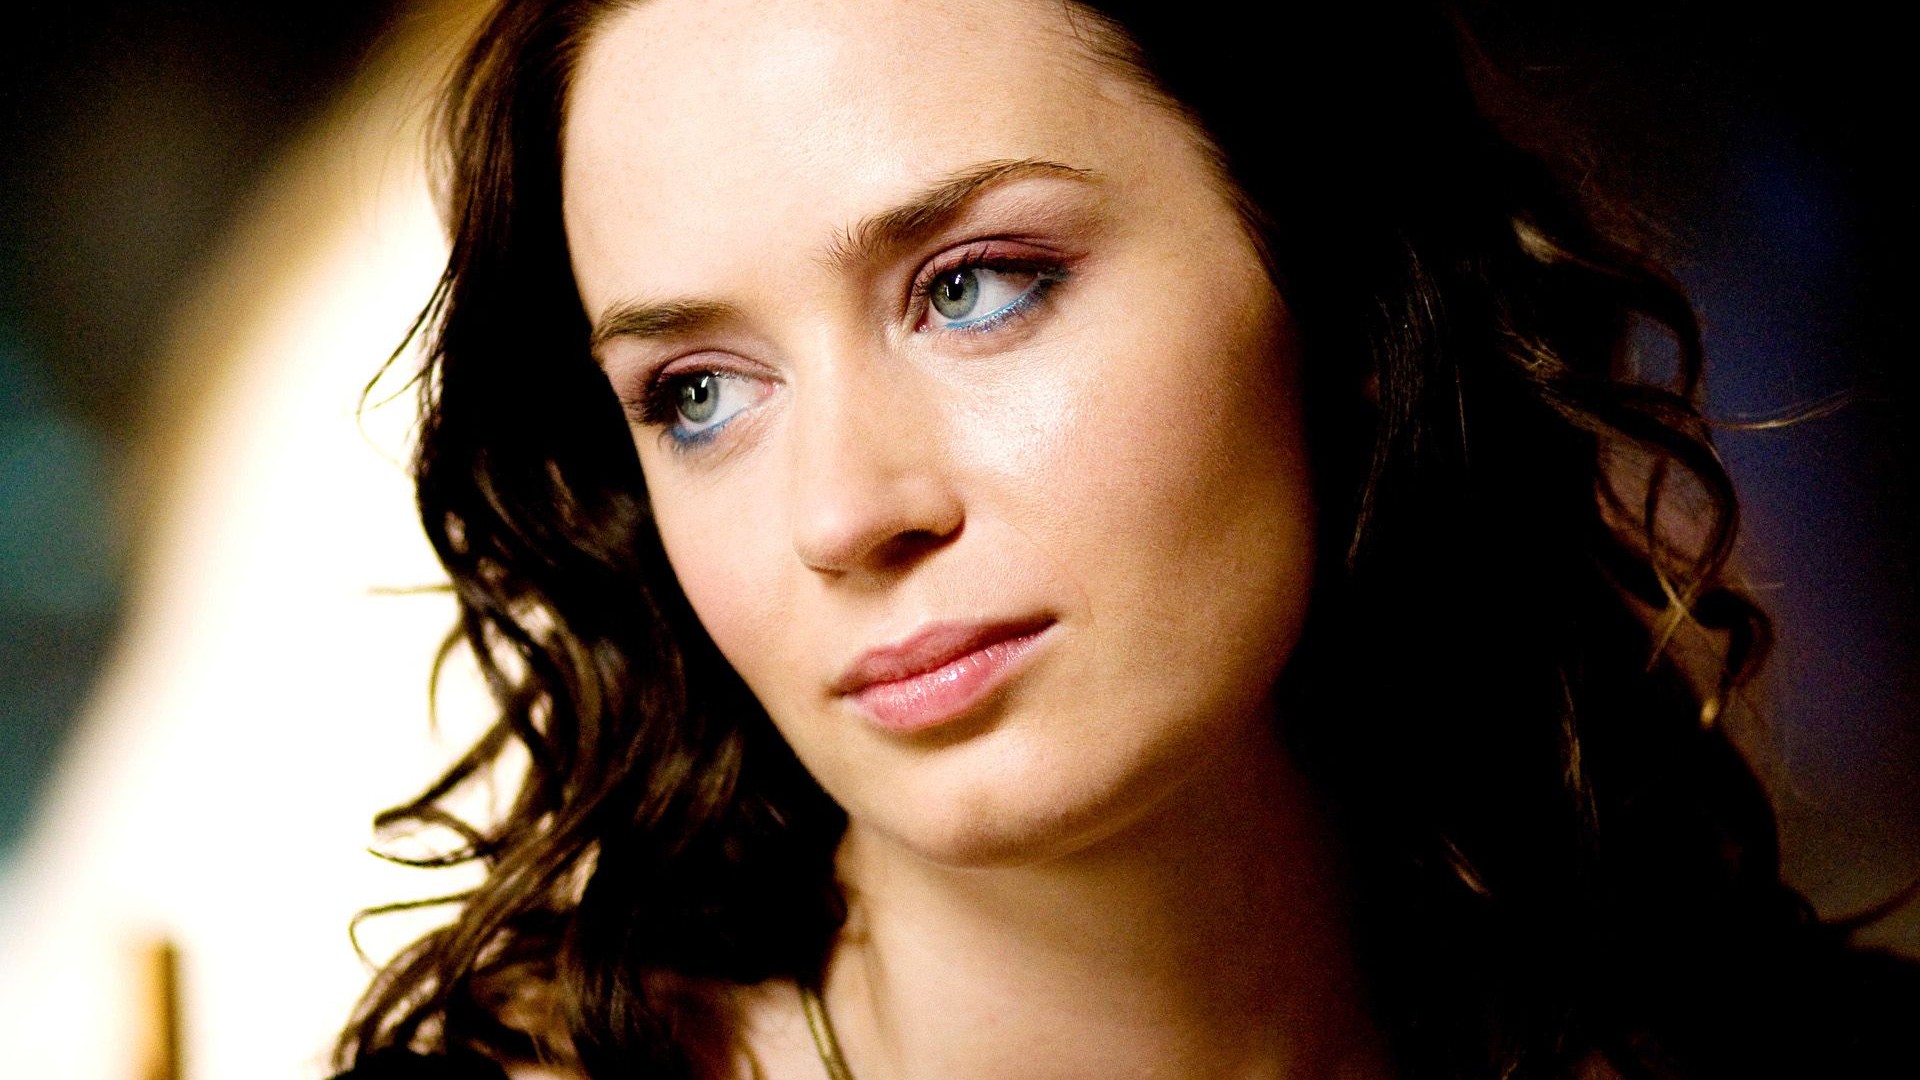 Emily Blunt HD Pics Wallpaper Background Of Your Choice